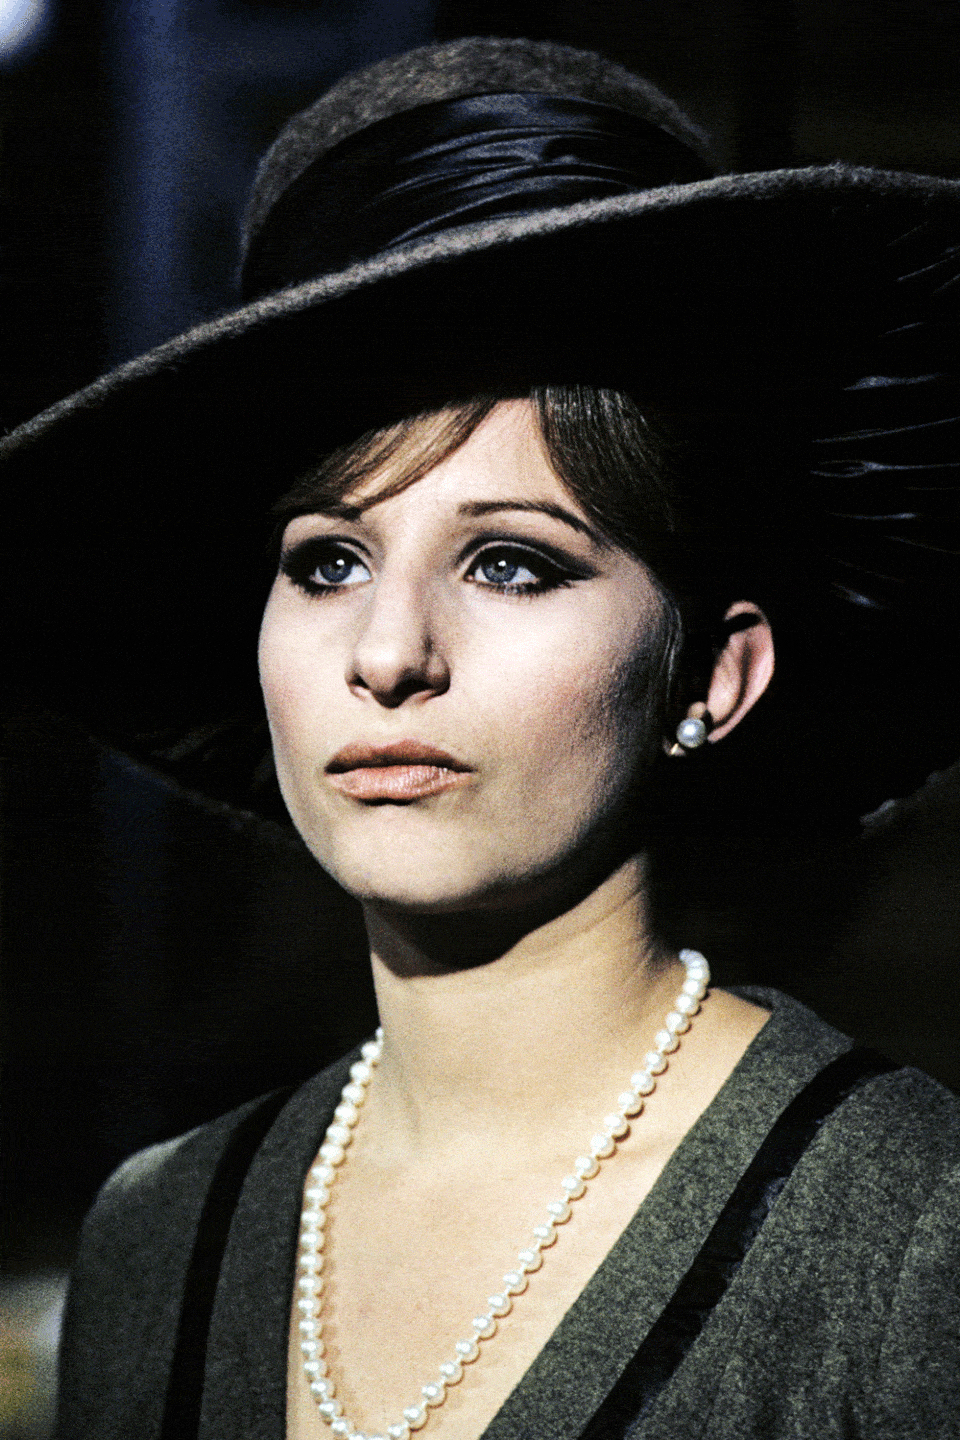 <p>After starring as Fanny Brice on Broadway, Streisand took the role to Hollywood for the movie version of <em>Funny Girl</em>, belting "Don't Rain on My Parade" and earning an Oscar for her incredible performance.</p>